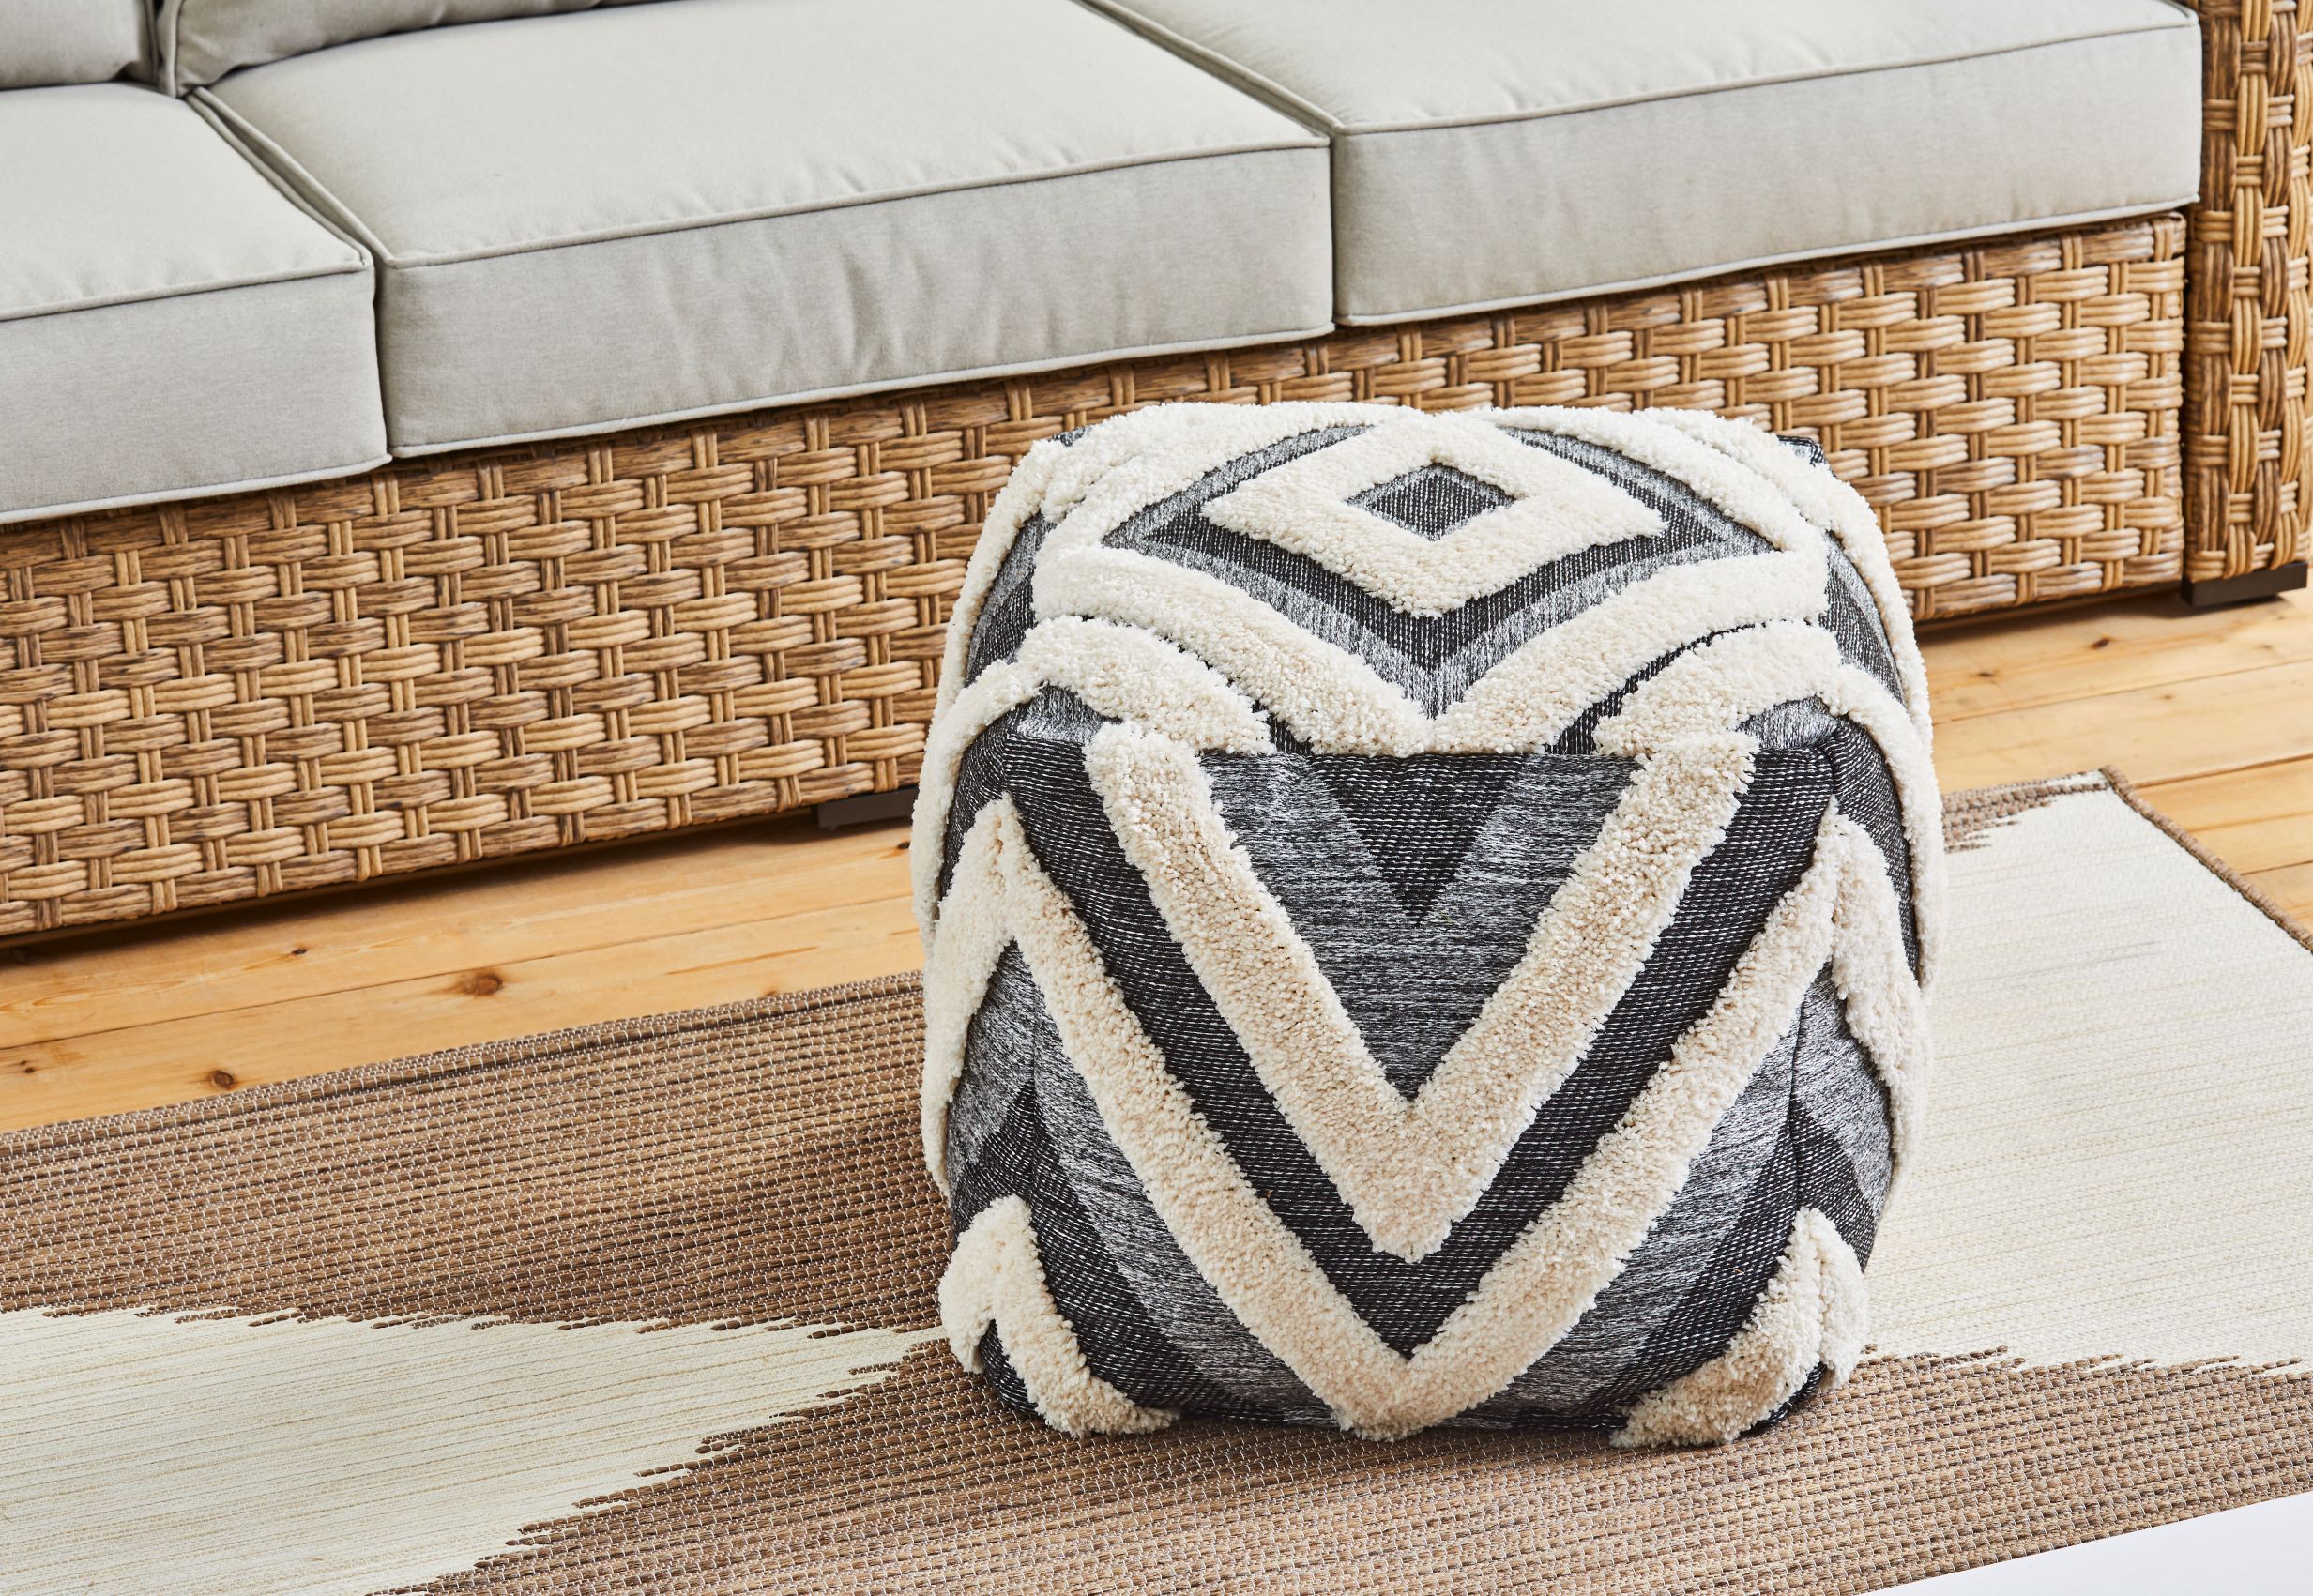 BH&G Tonal Tufted Outdoor Pouf, 16"x16"x16", Gray - image 4 of 5